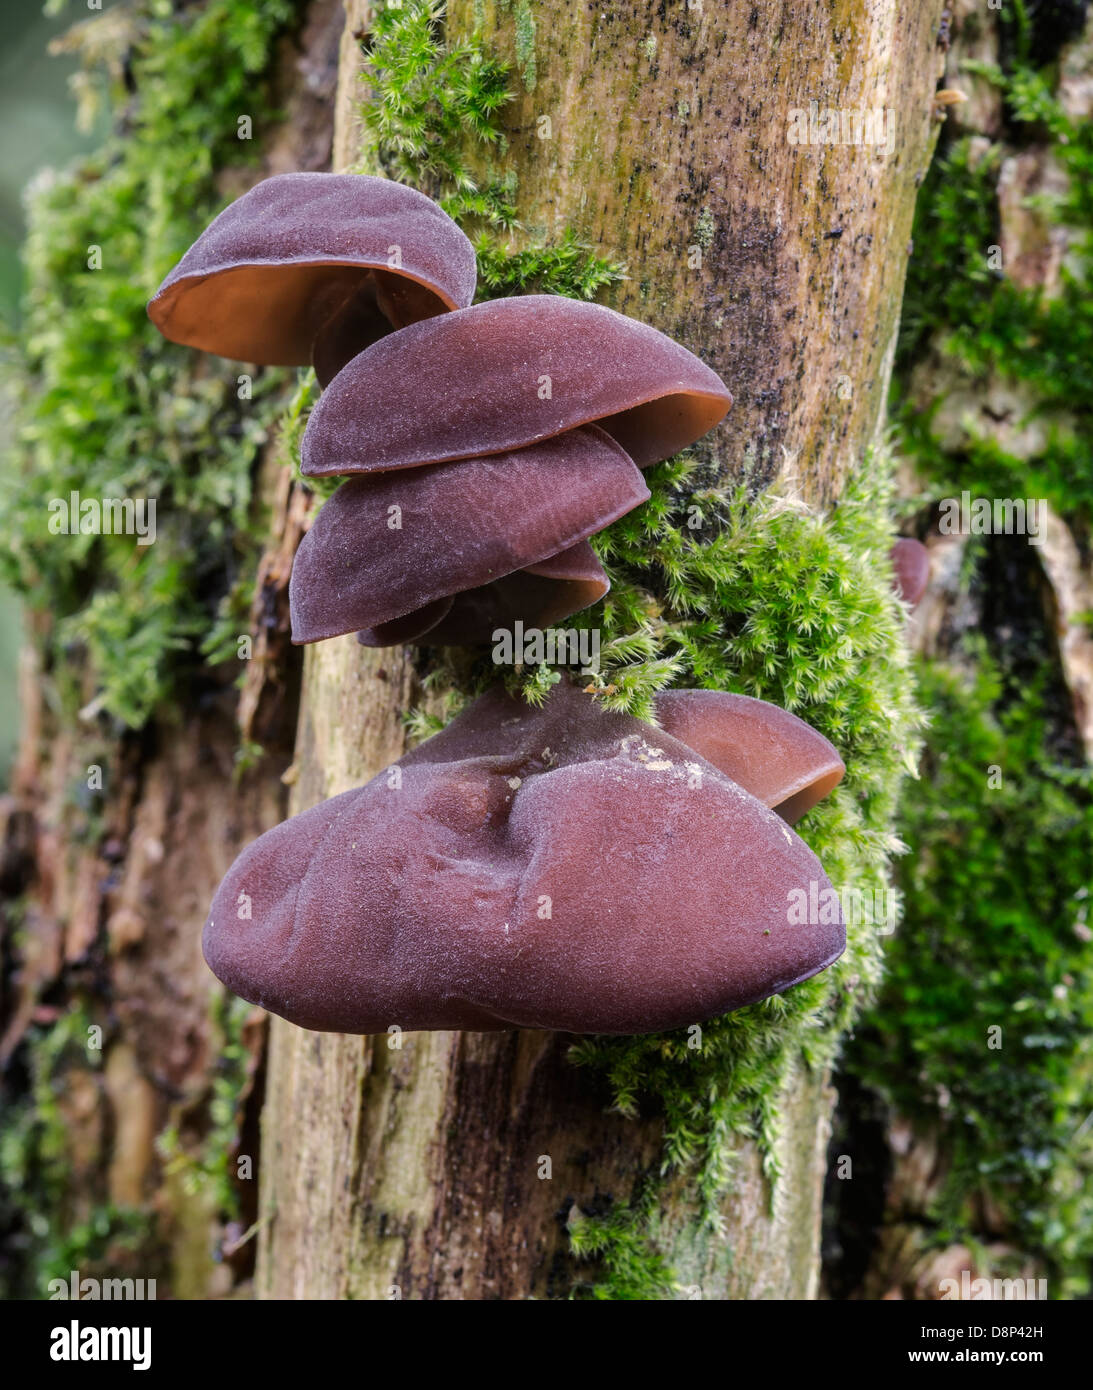 Auricularia auricula-judae also known as Jelly Ear or Jew's Ear. Seen here growing on the branch of an Elder Tree. Stock Photo